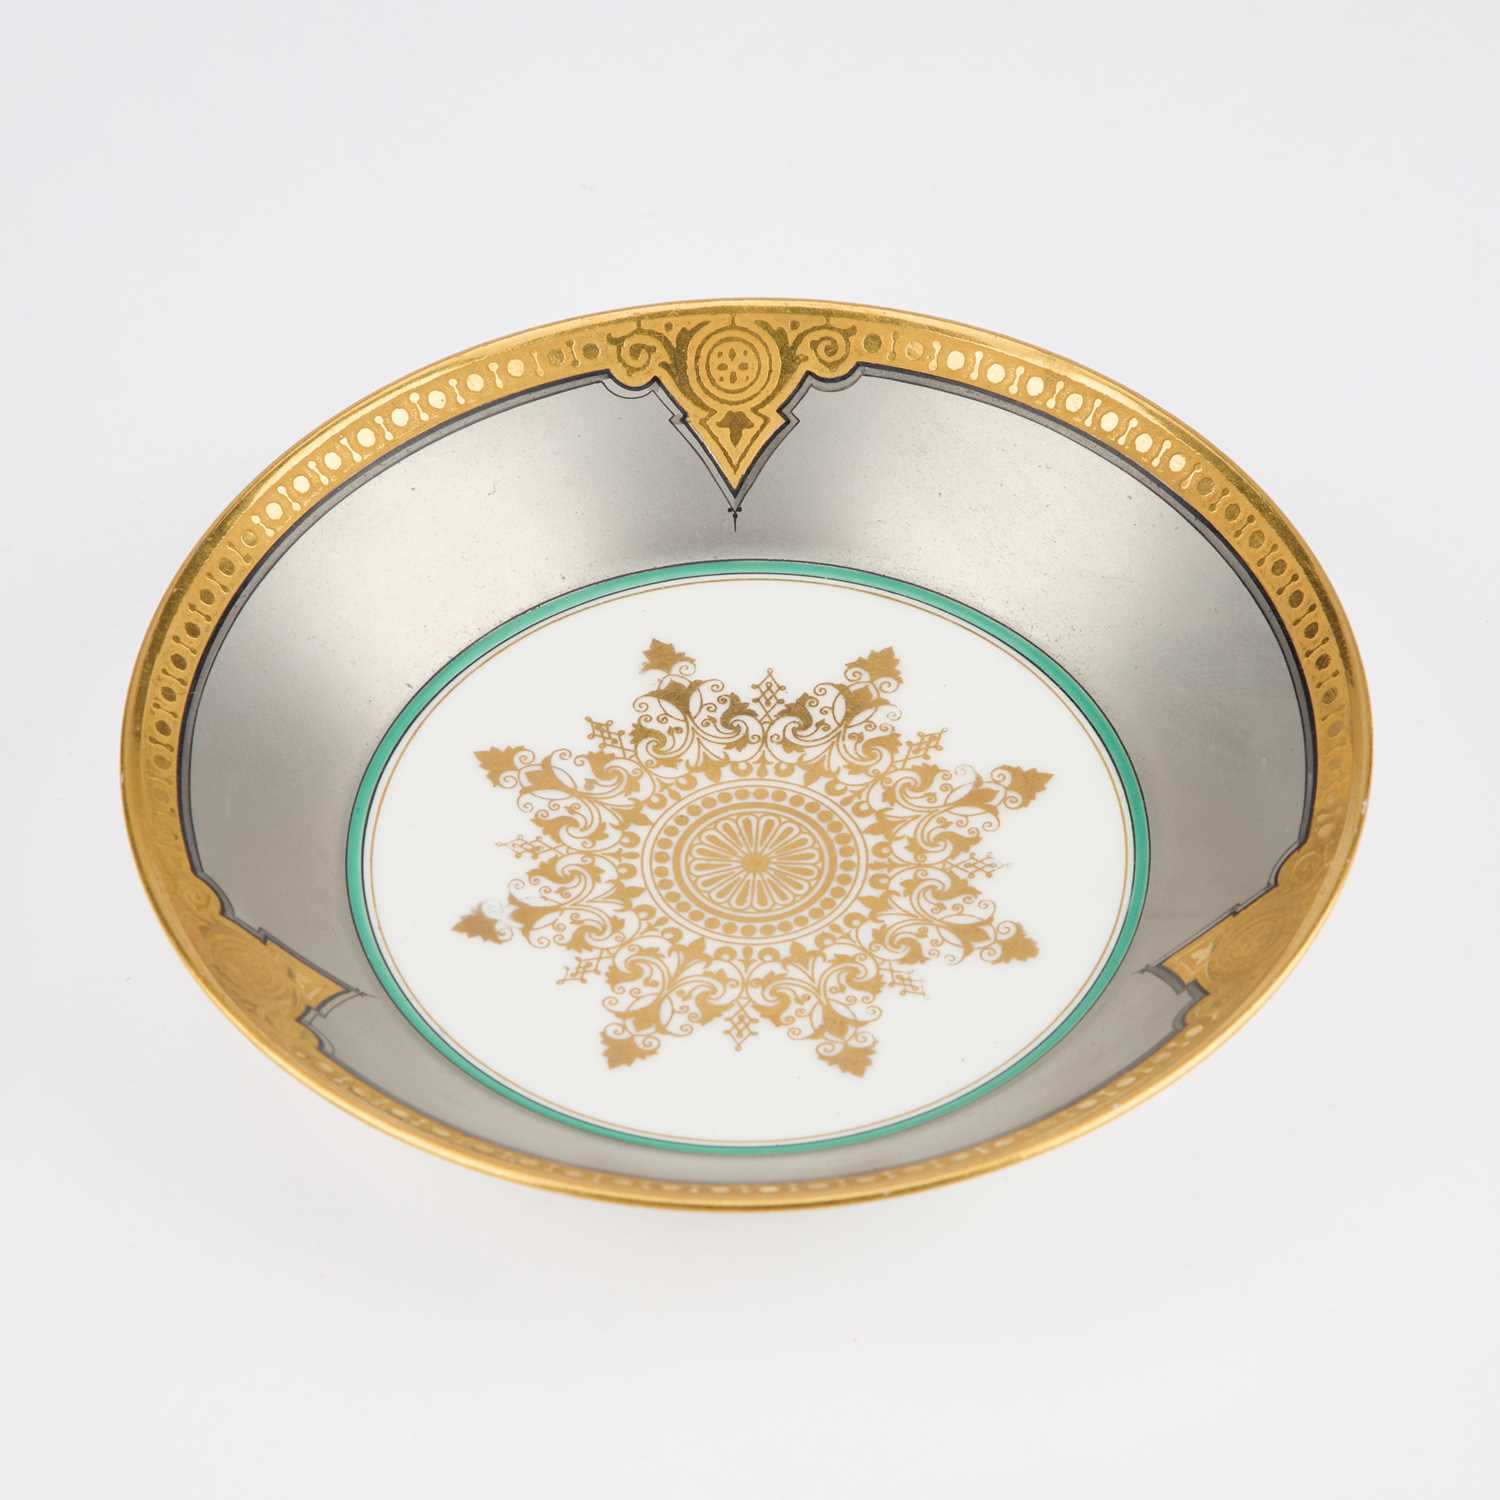 A SÈVRES STYLE CUP AND SAUCER, LATE 19TH CENTURY - Image 3 of 4